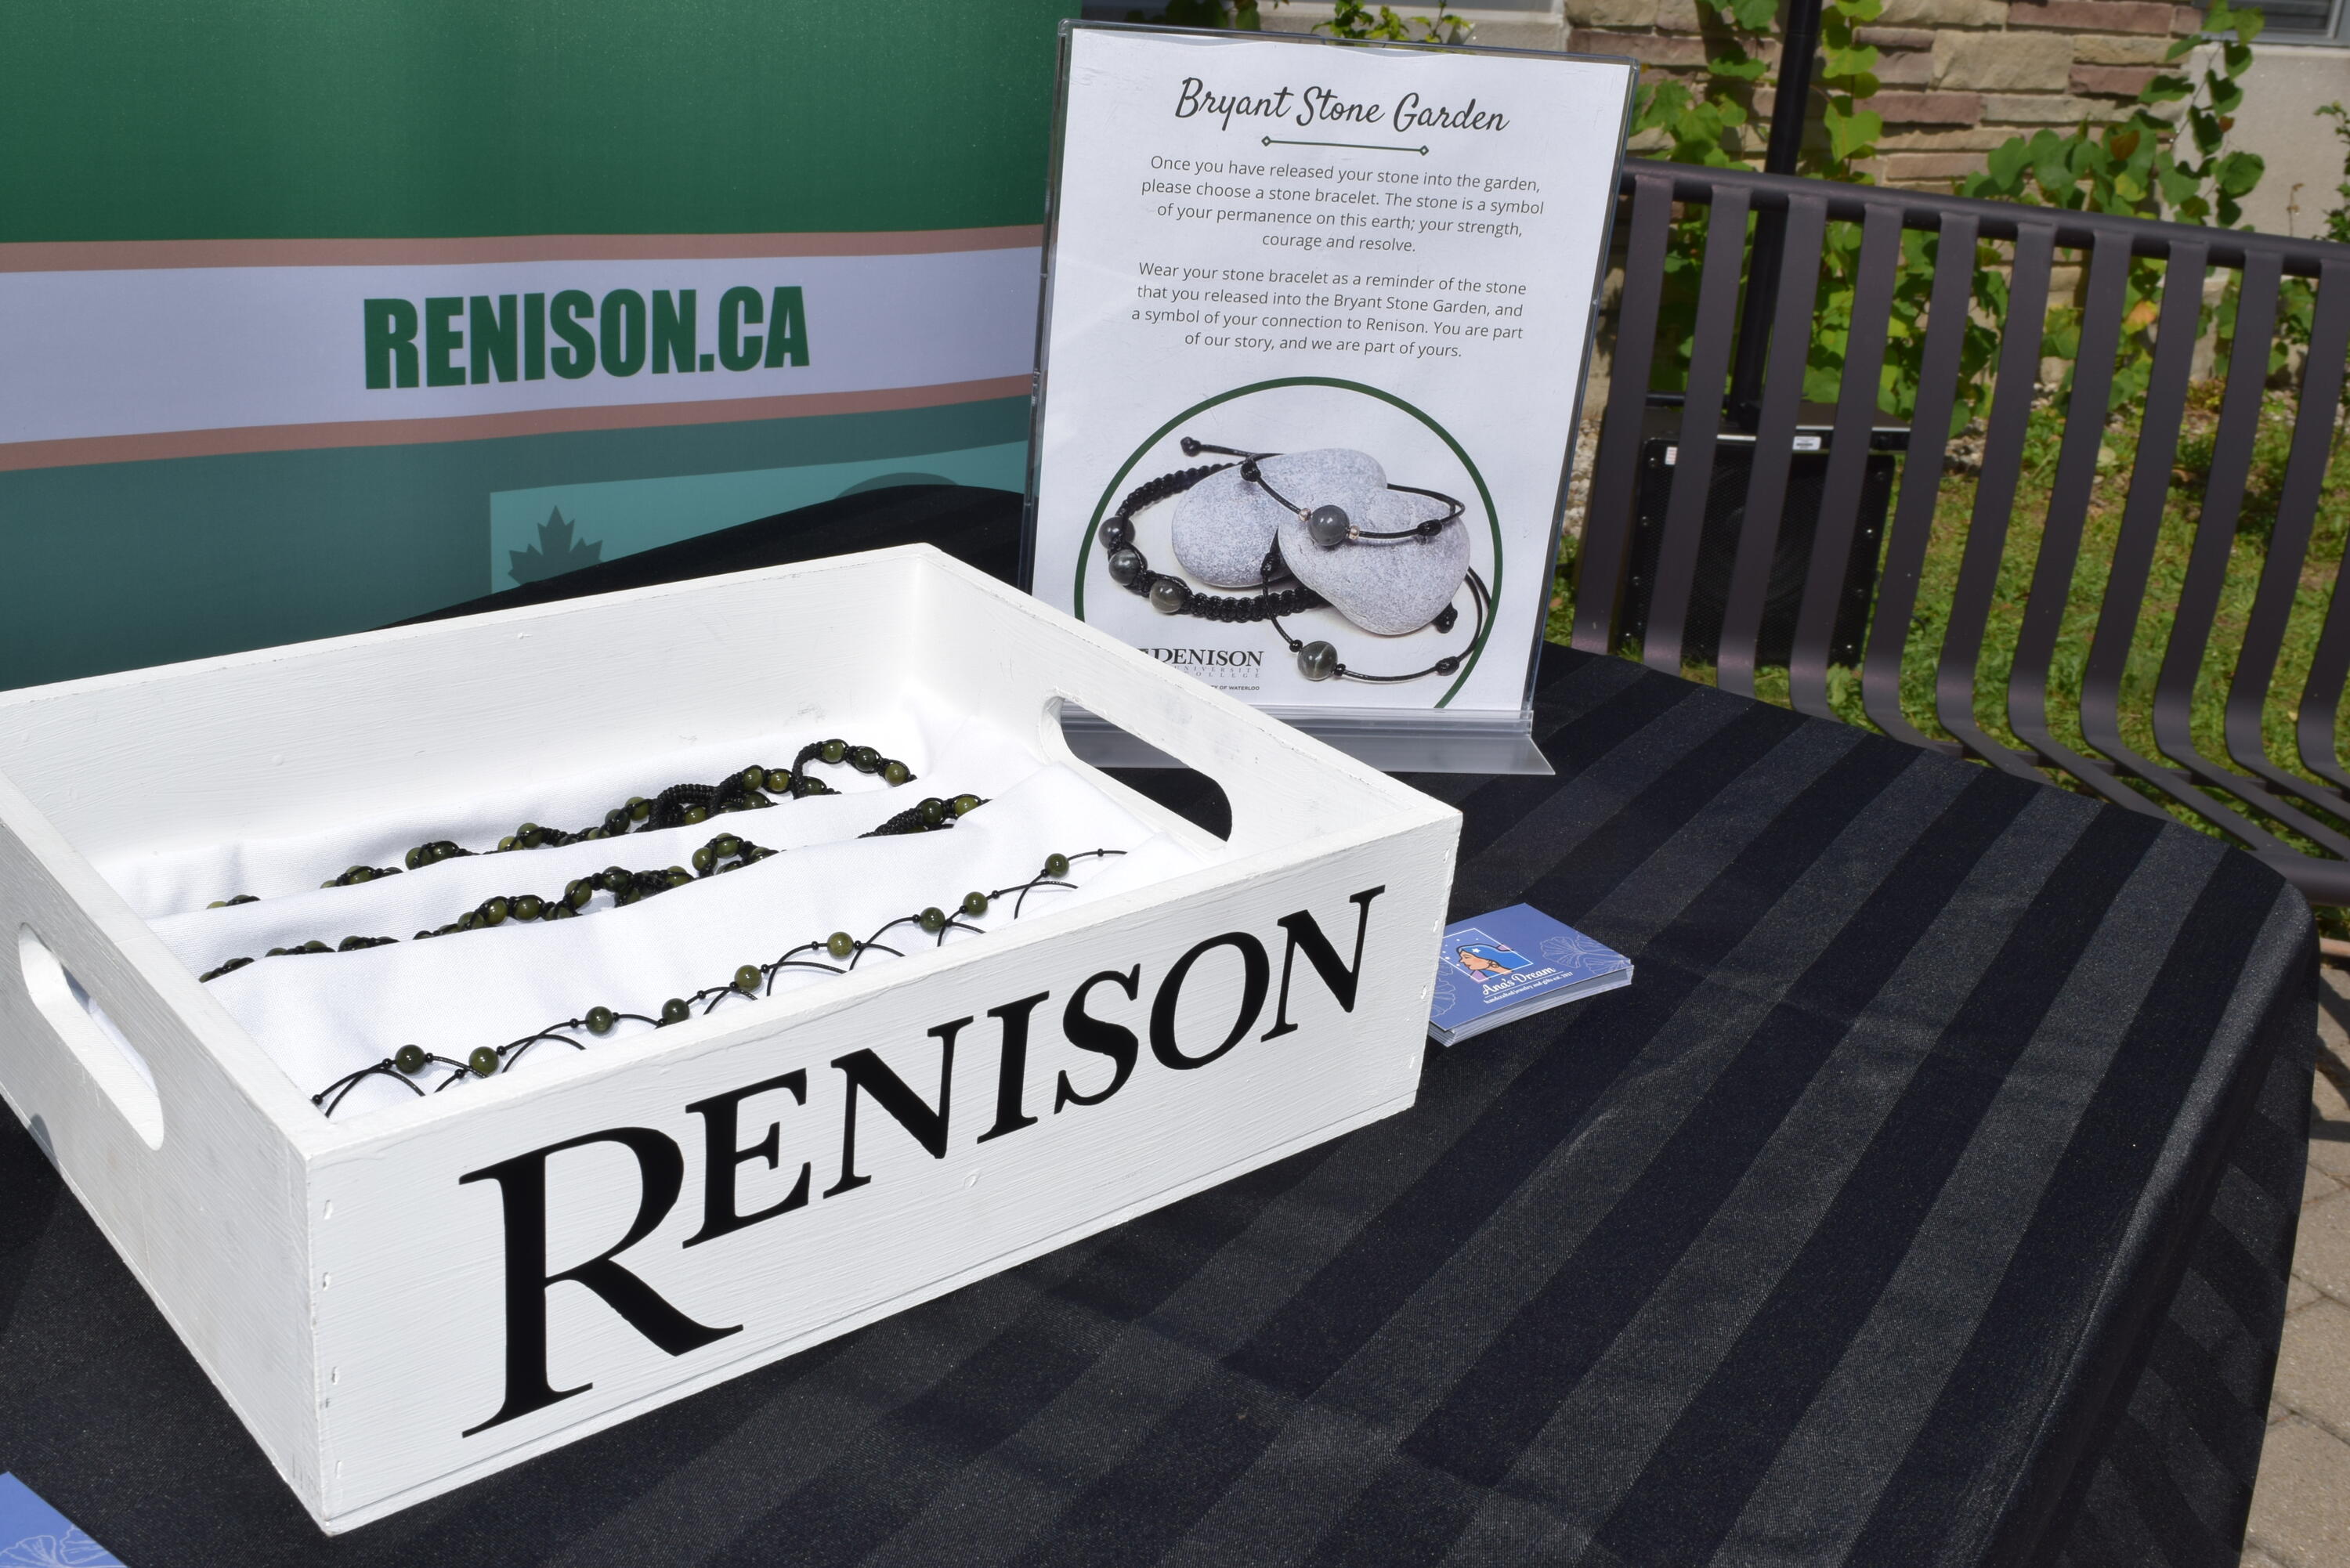 A box with the Renison logo is shown, filled with bracelets that are made of cord with a stone in the centre.